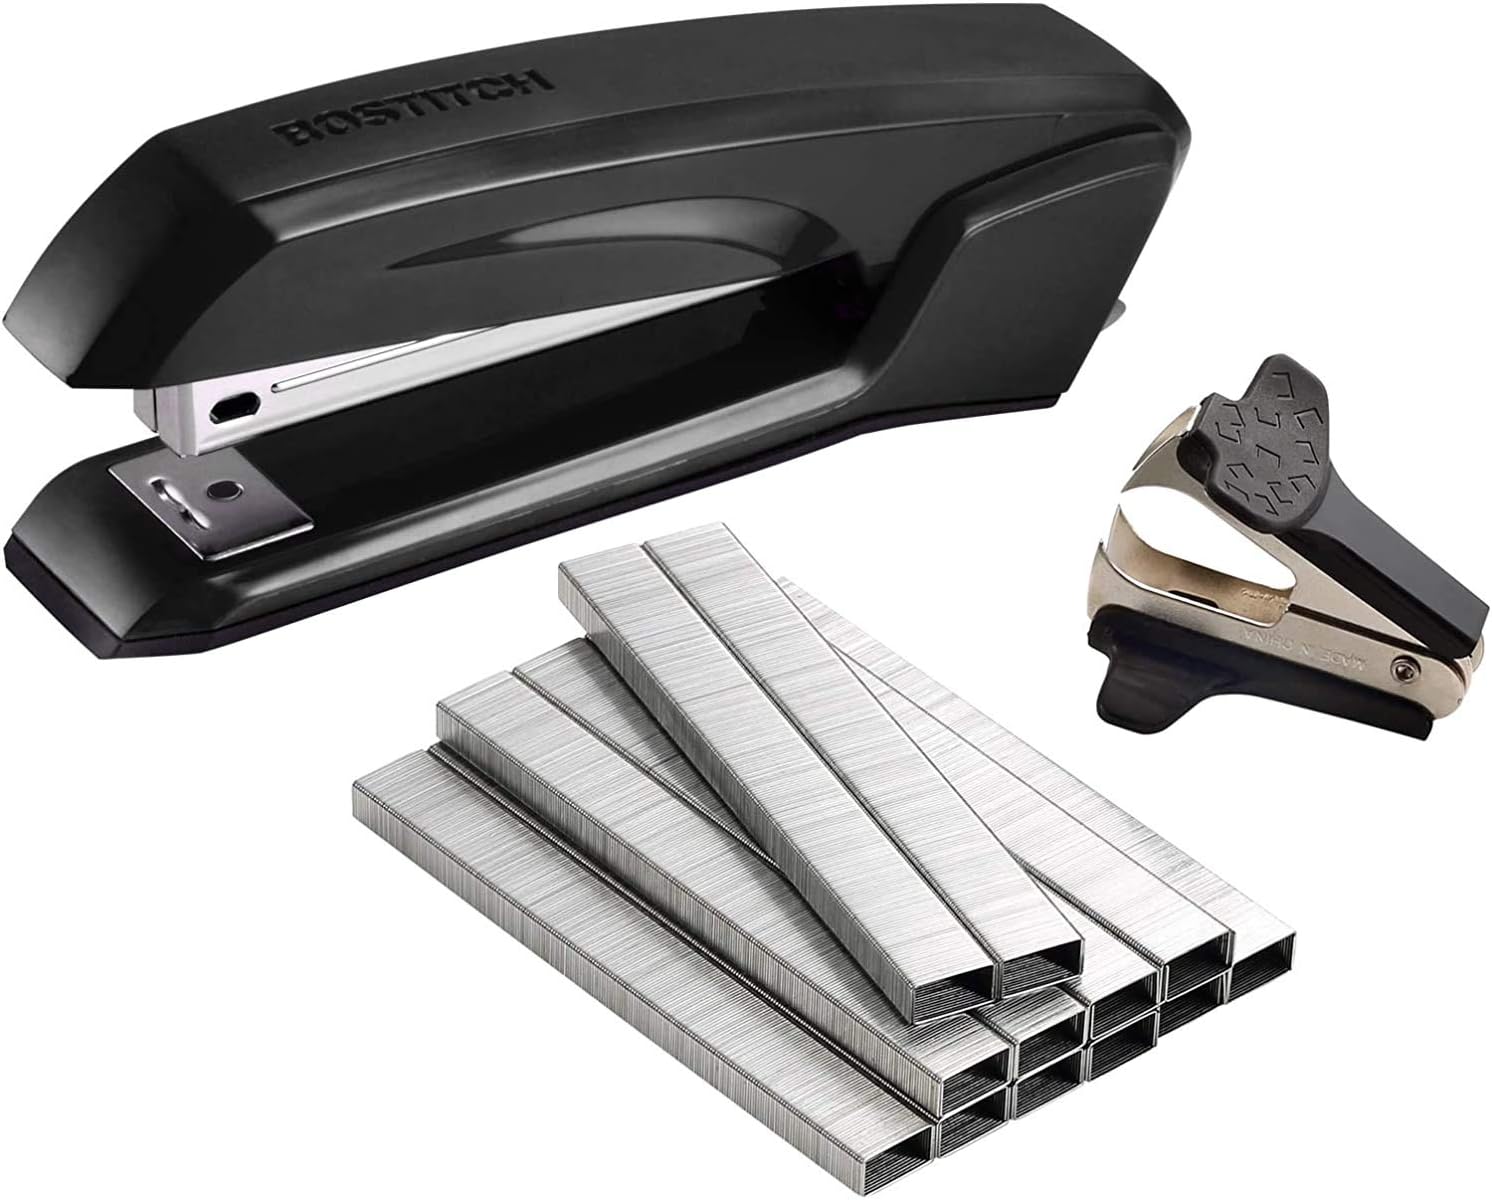 Bostitch Office Ascend 3 in 1 Stapler Value Pack, 20 Sheet Capacity, Includes 5000 Staples, Integrated Remover & and Extra Staple Remover, Staple Storage Compartment, Assorted Colors (Colors May Vary)